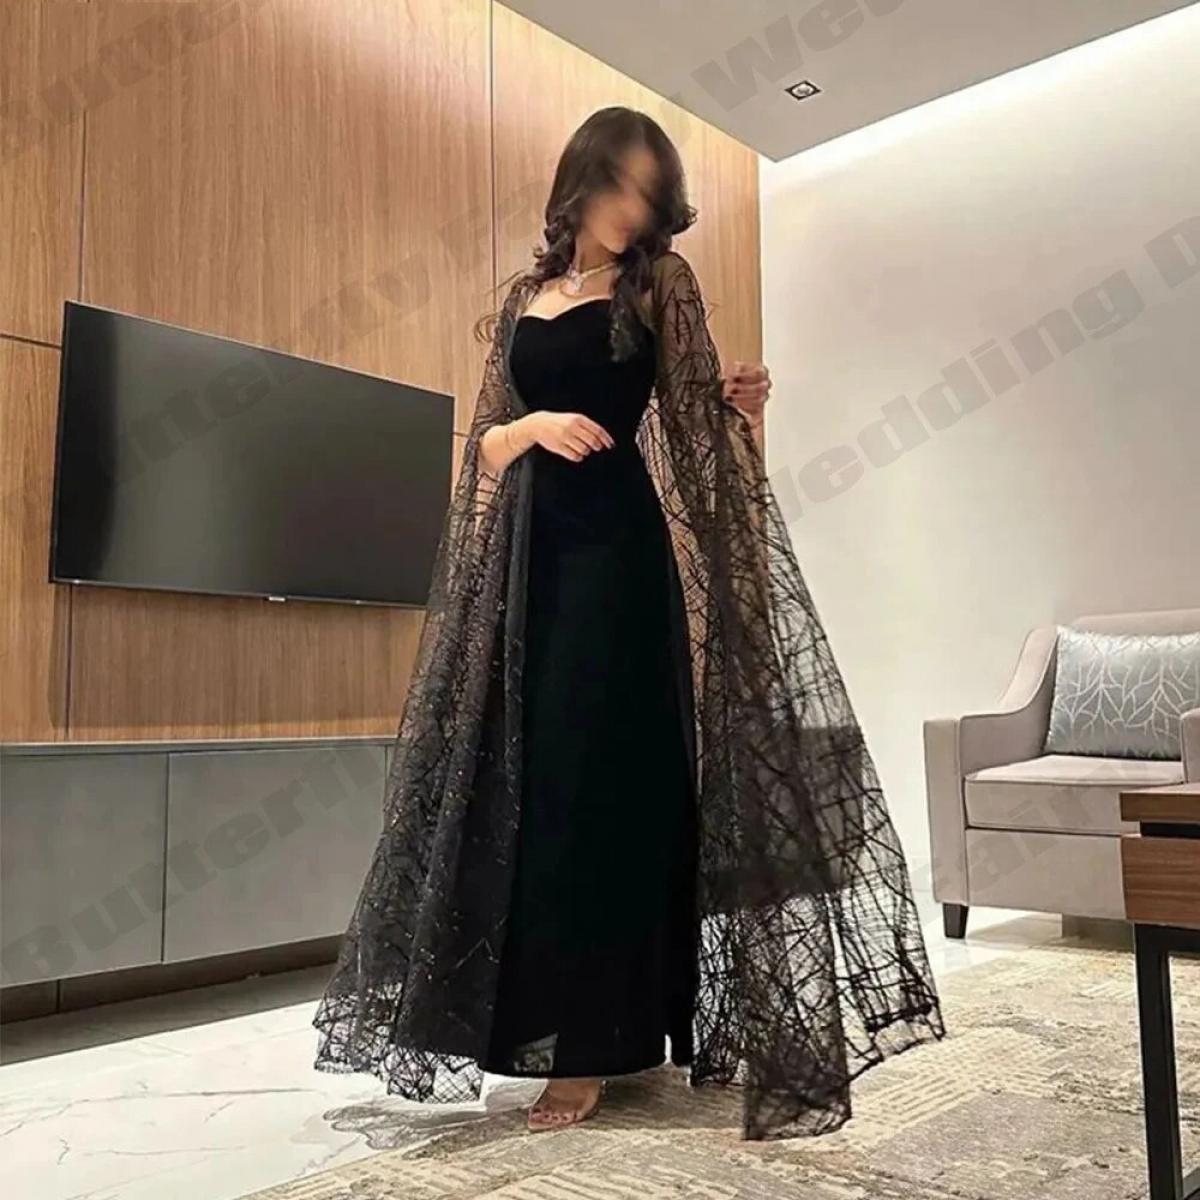 Beautiful  Sleeveless Backless Evening Dresses Club Party Simple Elegant Off Shoulder Satin Women Summer Clothes New 202